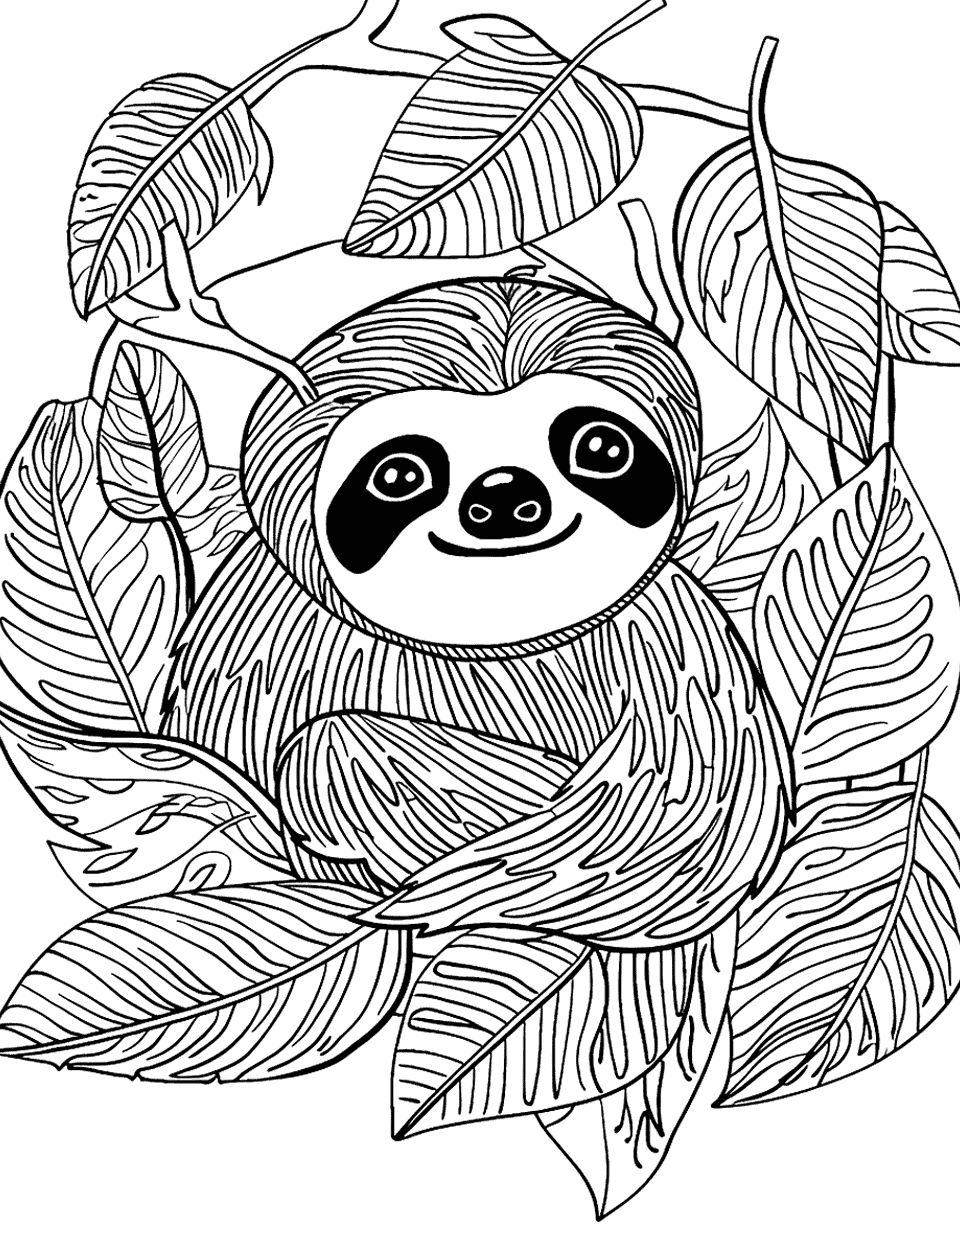 Leafy Haven for a Sloth Coloring Page - A sloth surrounded by various leaves.